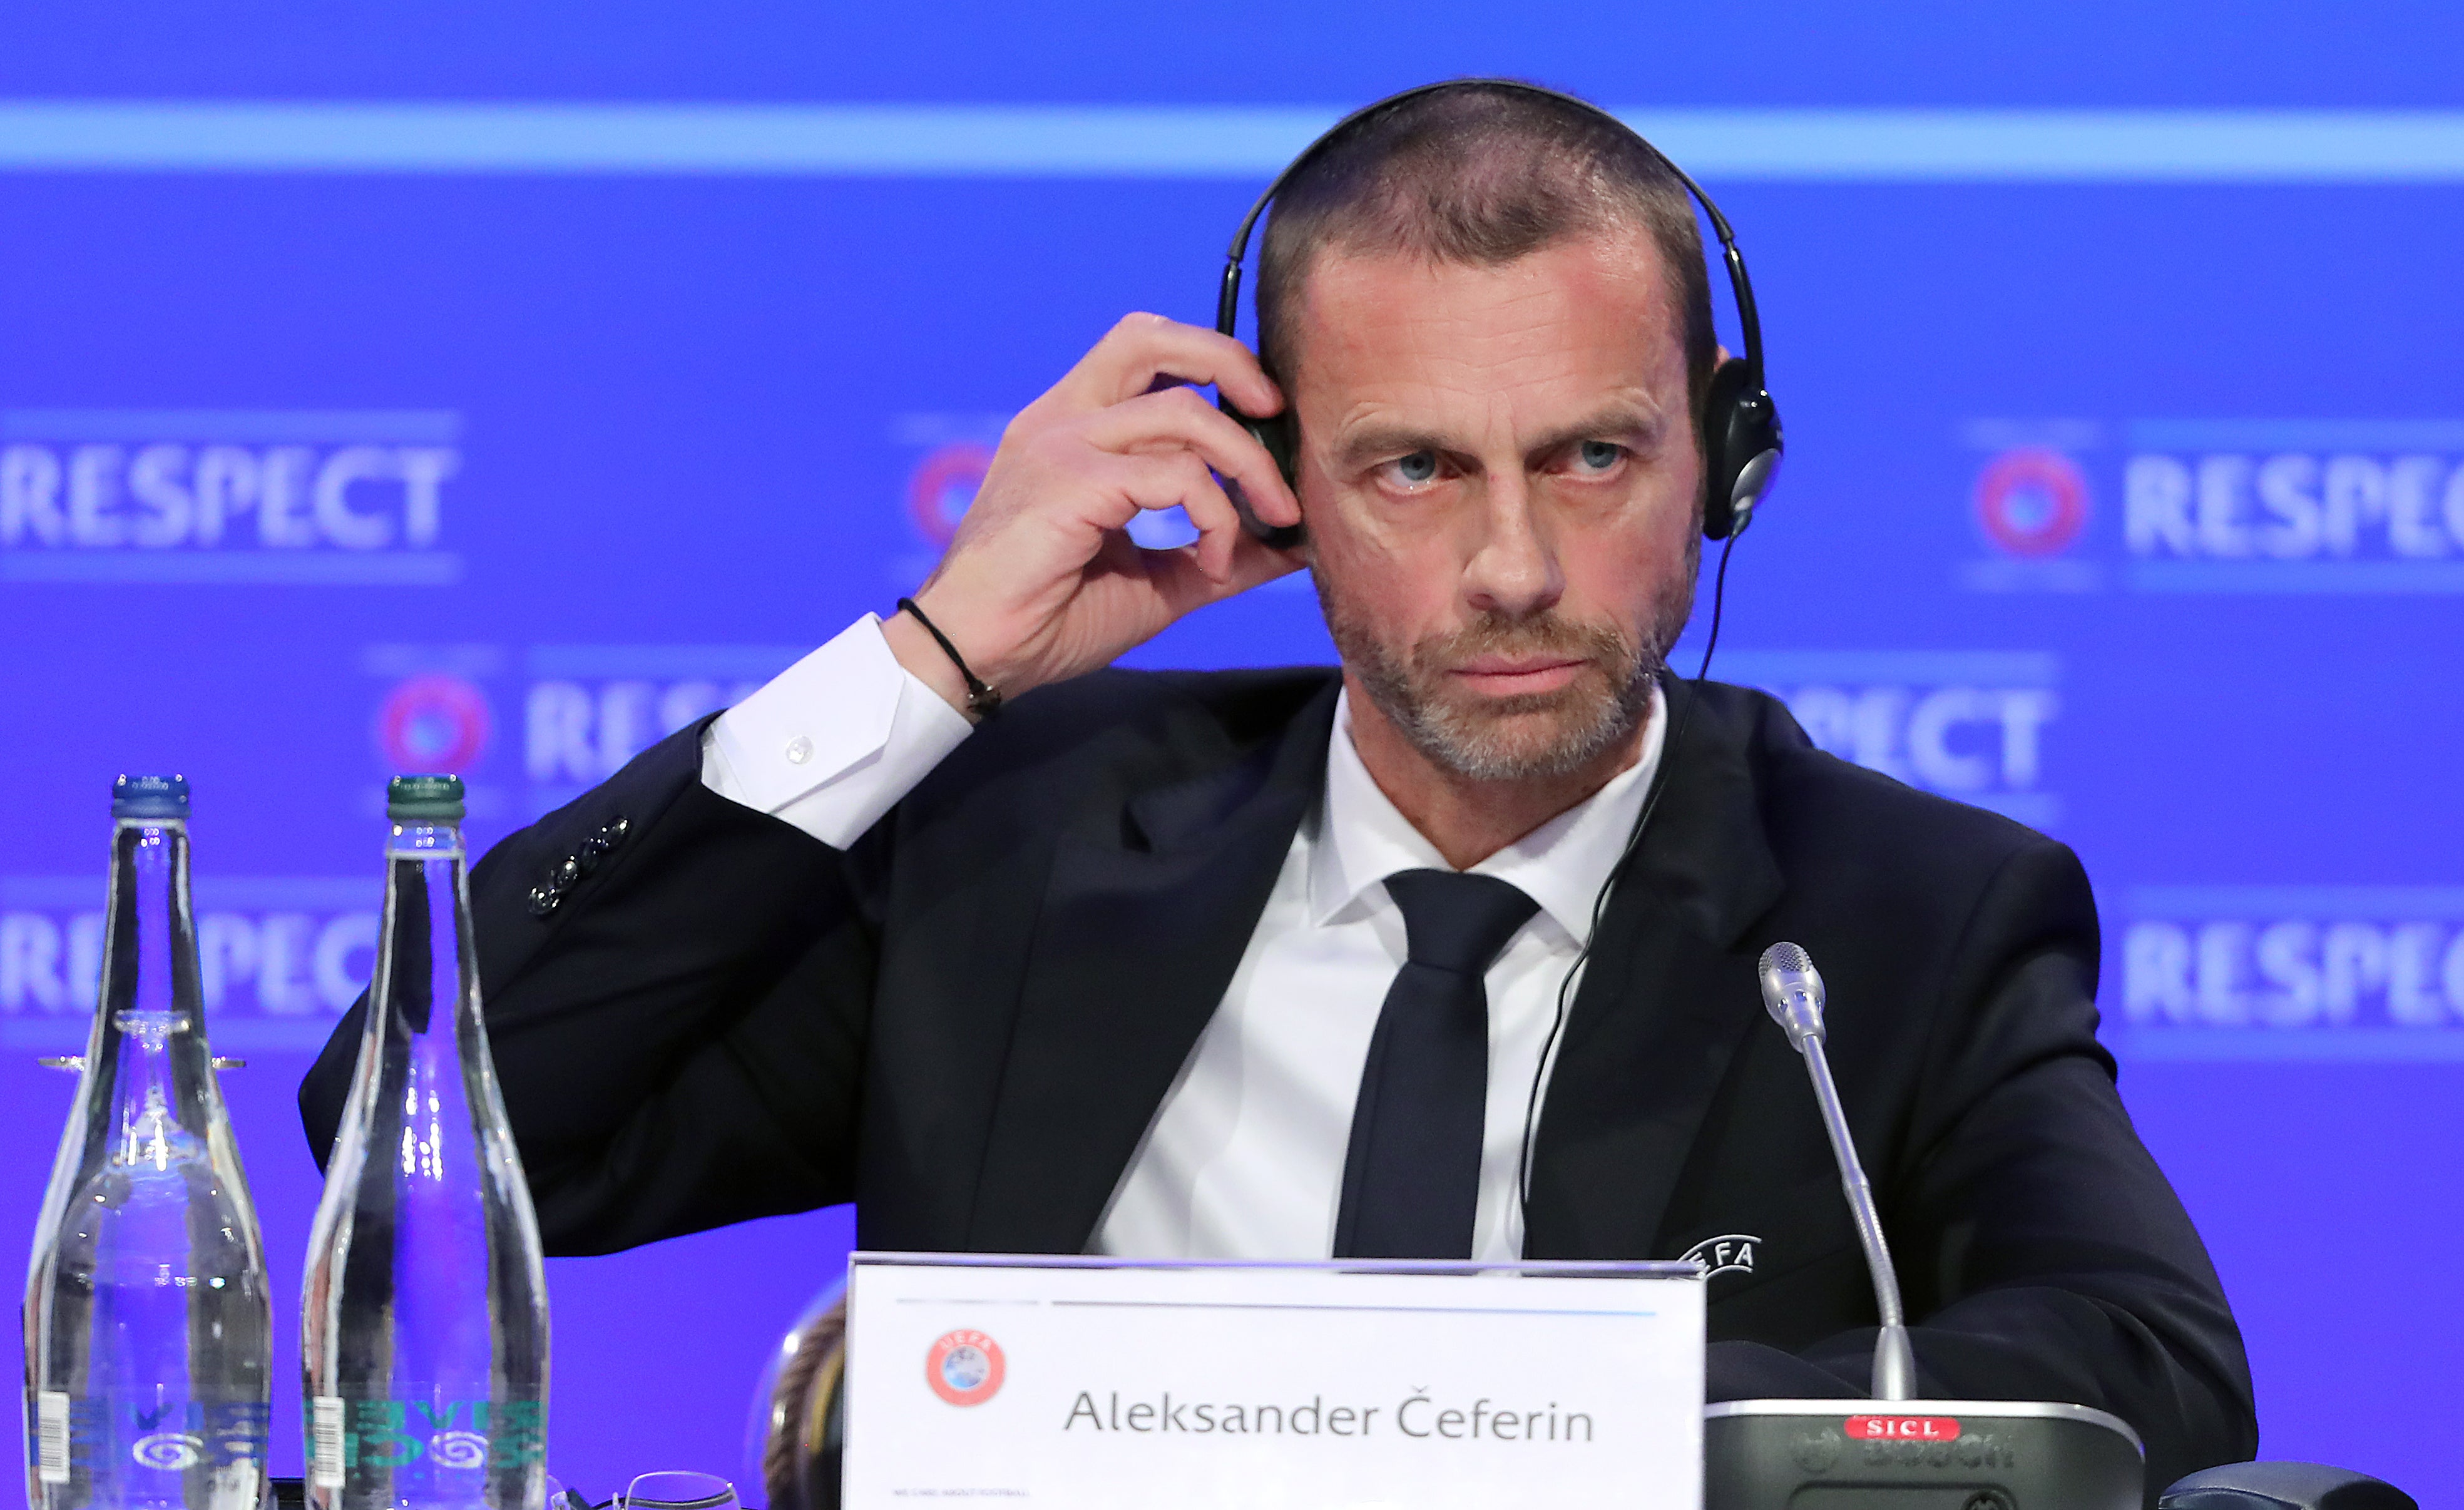 UEFA and its president Aleksander Ceferin have been labelled "greedy" by Chelsea and Manchester City supporters